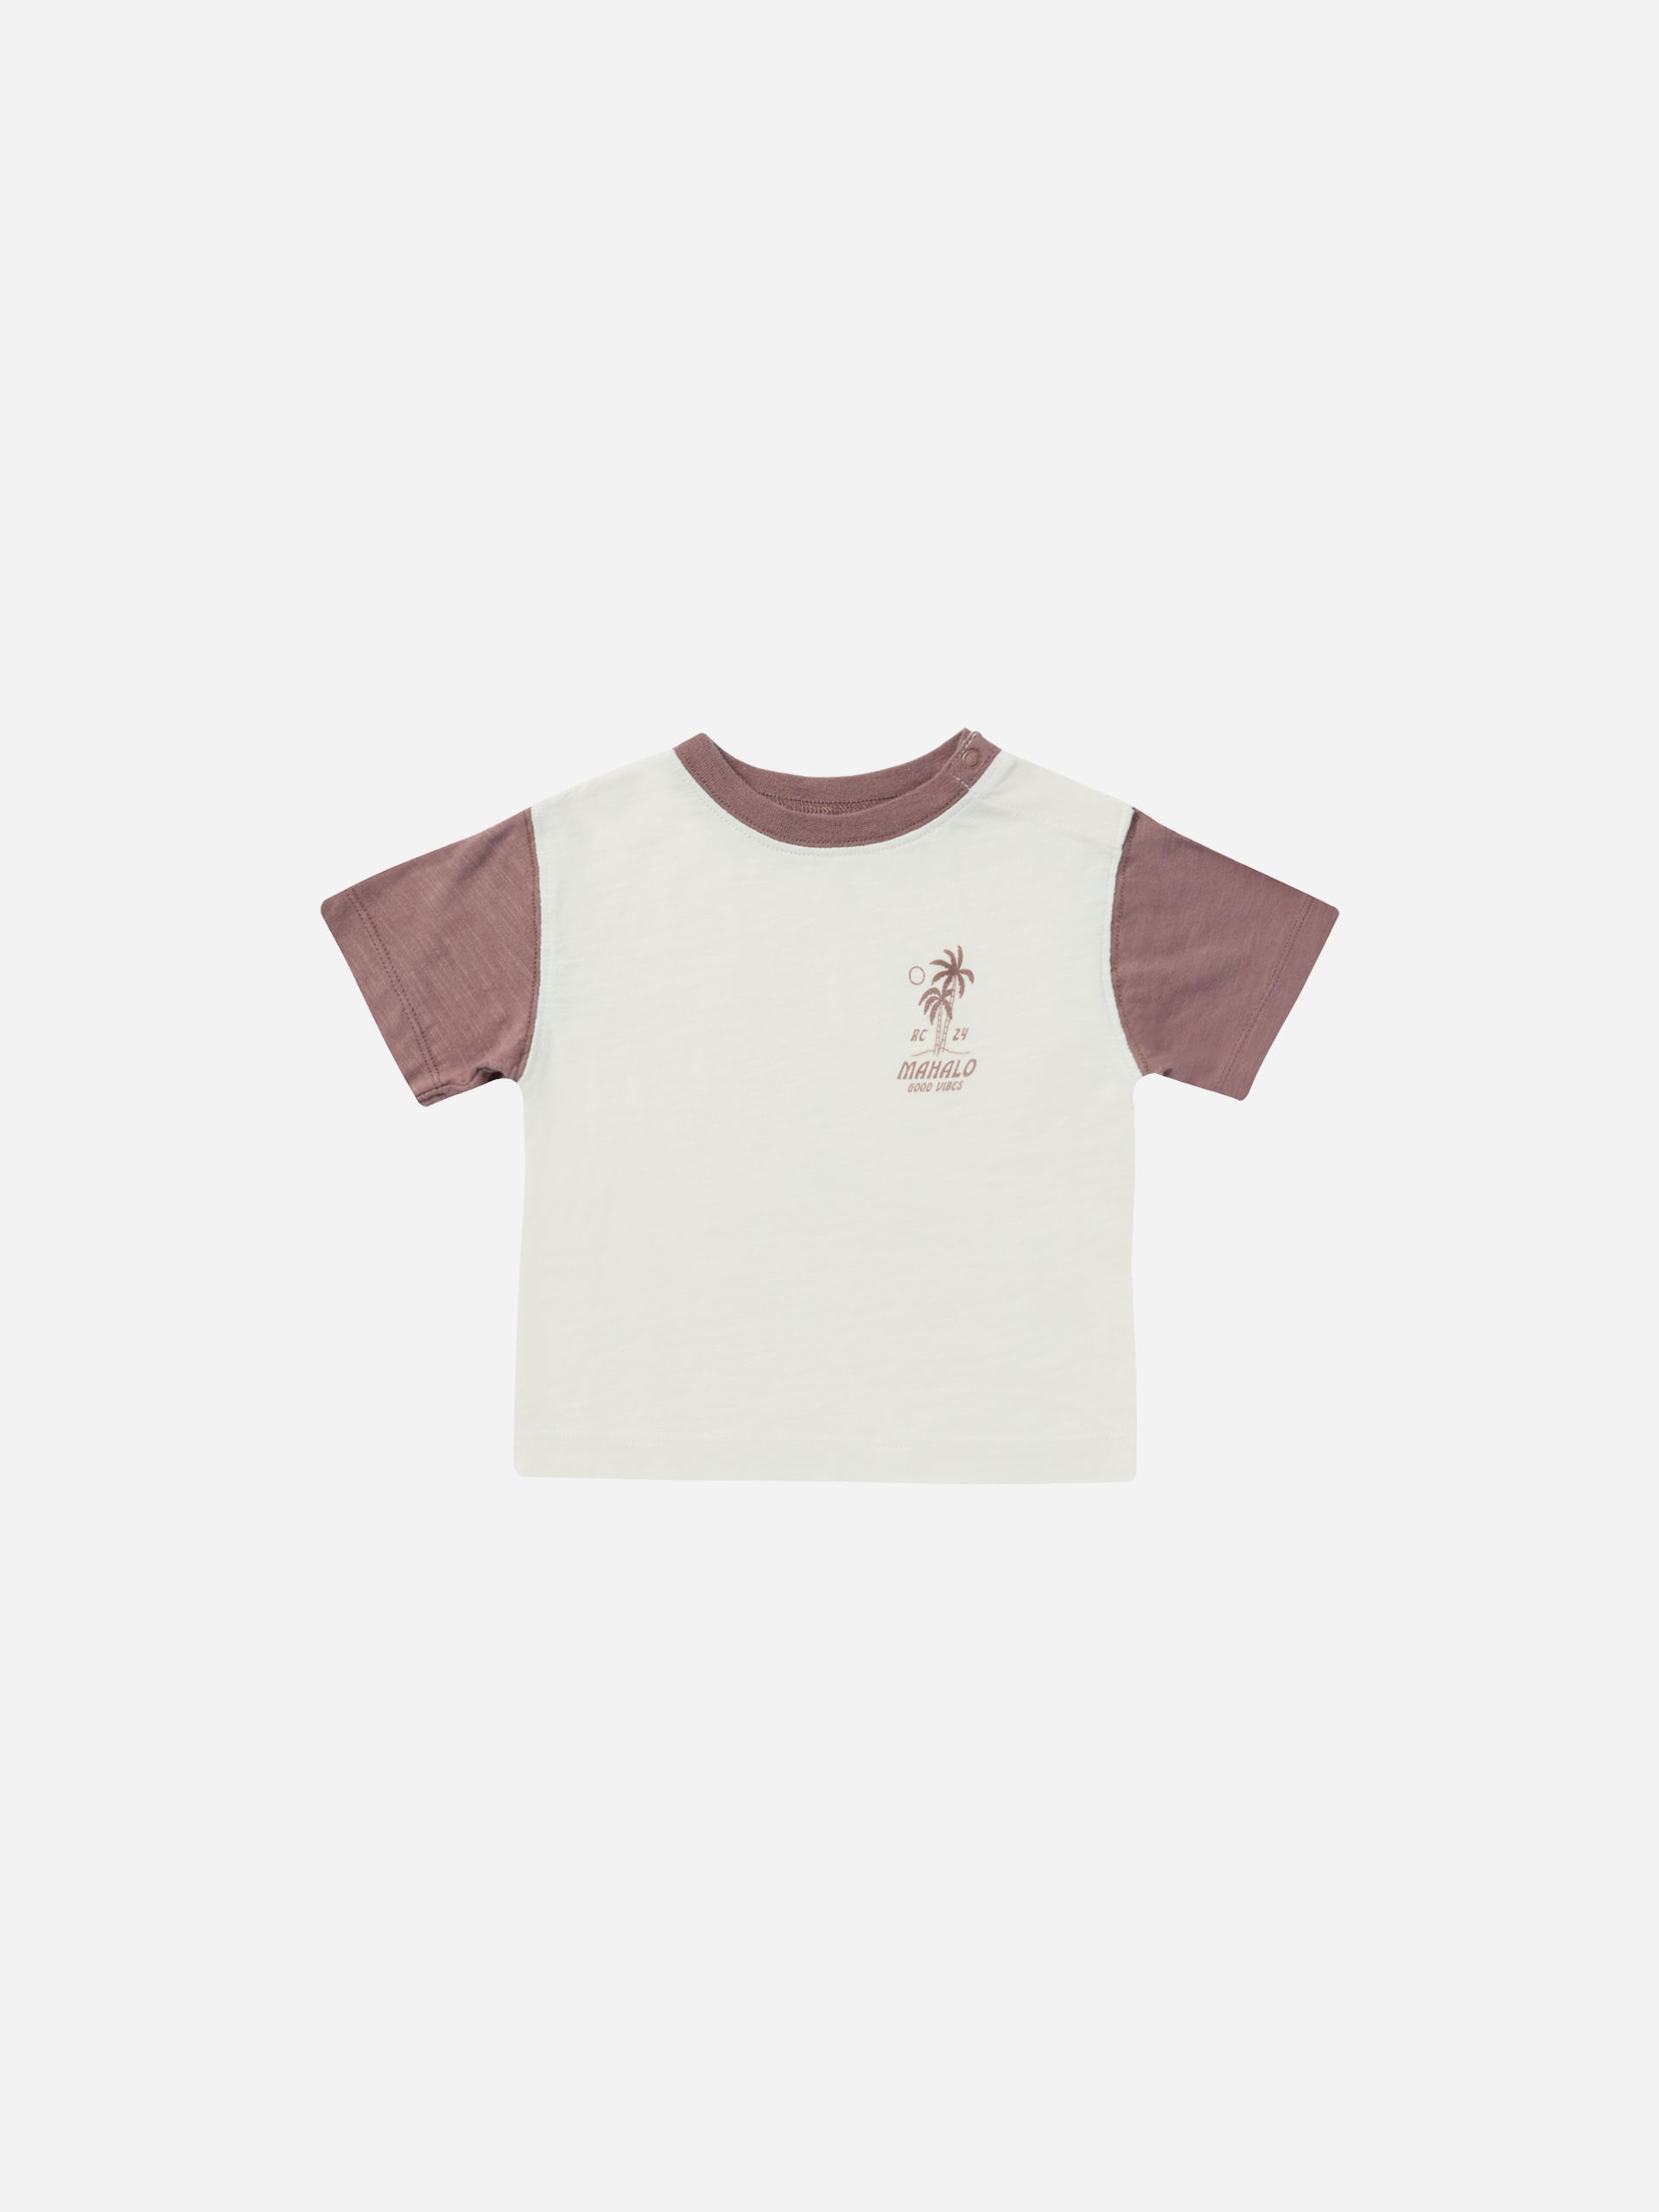 Contrast Short Sleeve Tee || Mahalo - Rylee + Cru | Kids Clothes | Trendy Baby Clothes | Modern Infant Outfits |